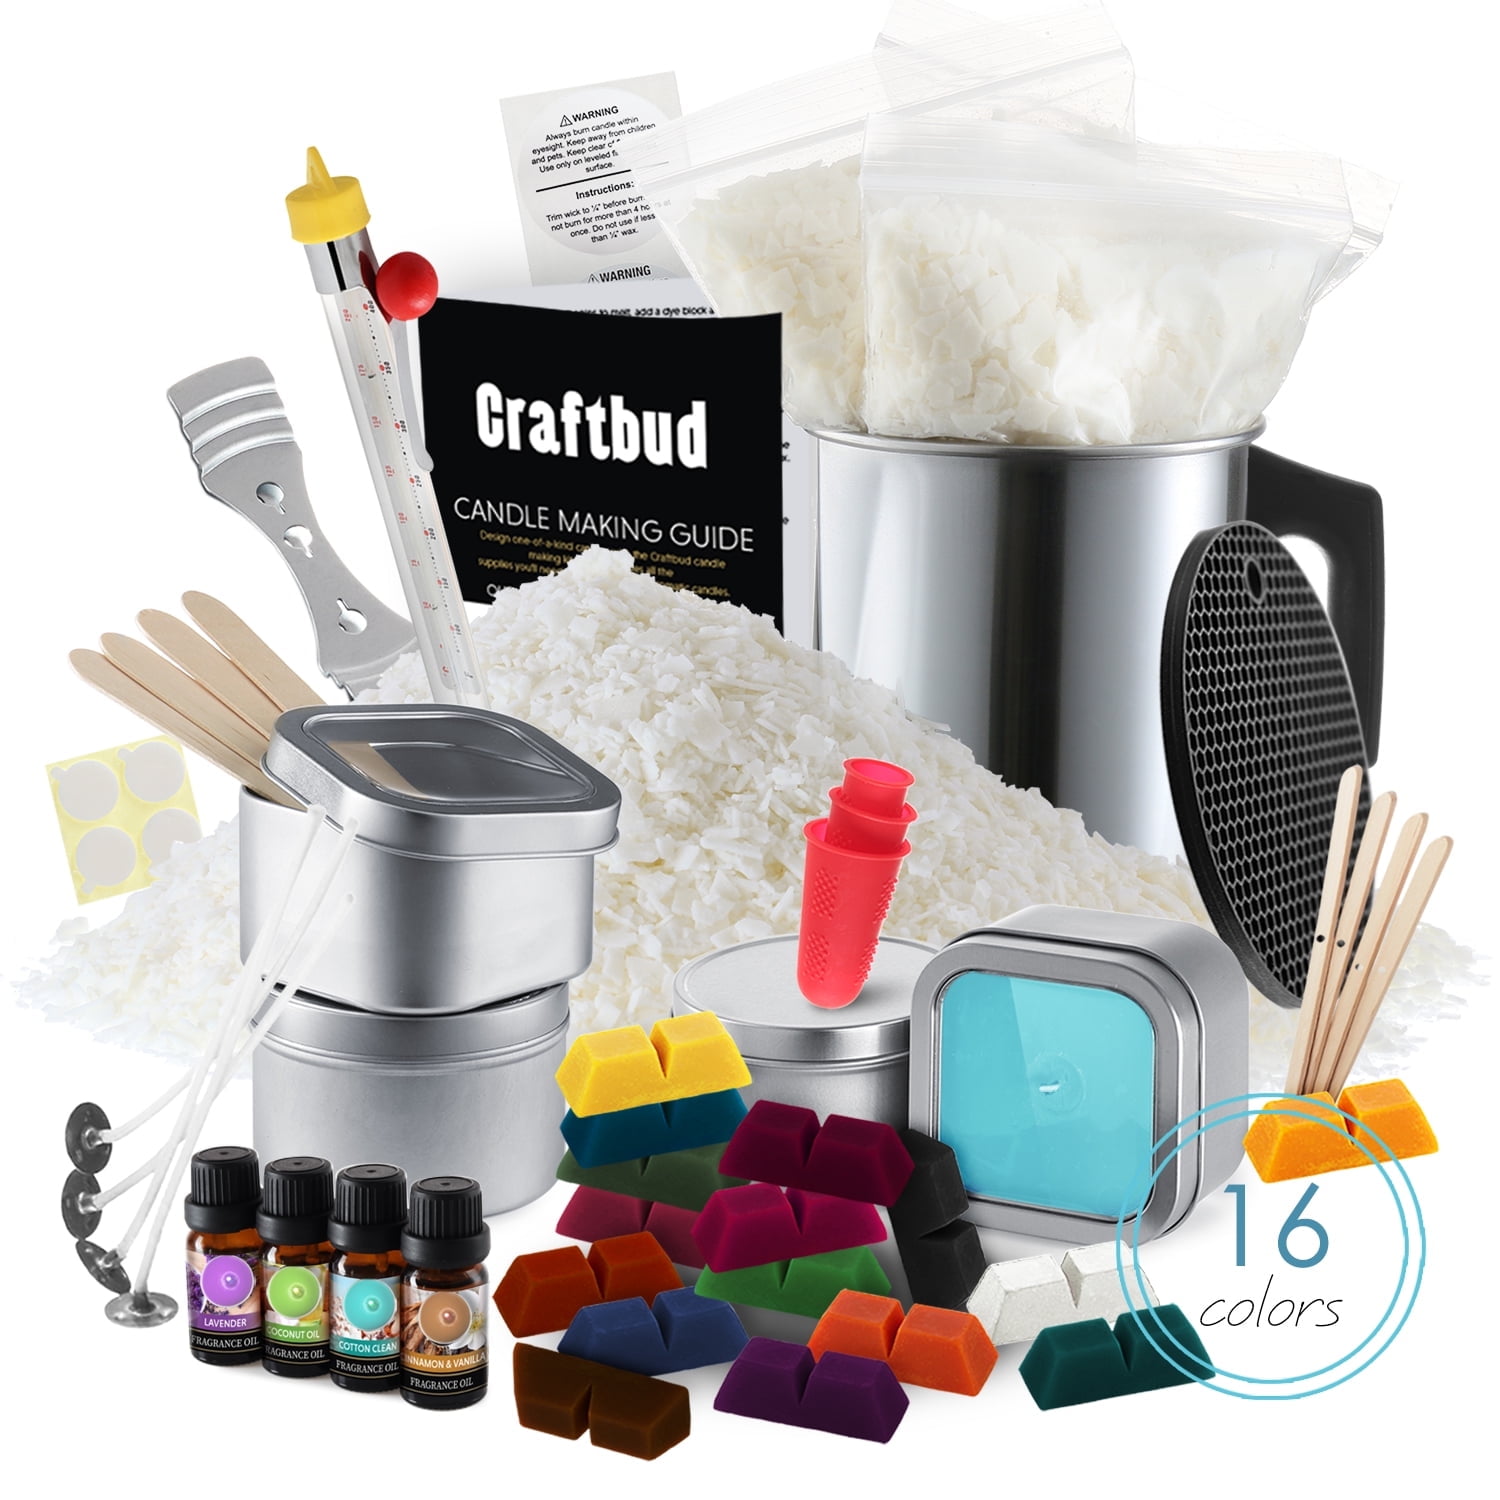 Craftbud 108 Piece Candle Making Kit for Adults & Kids - Full DIY Soy Candle  Making Kit with Candle Wax and Supplies - On Sale - Bed Bath & Beyond -  35166477